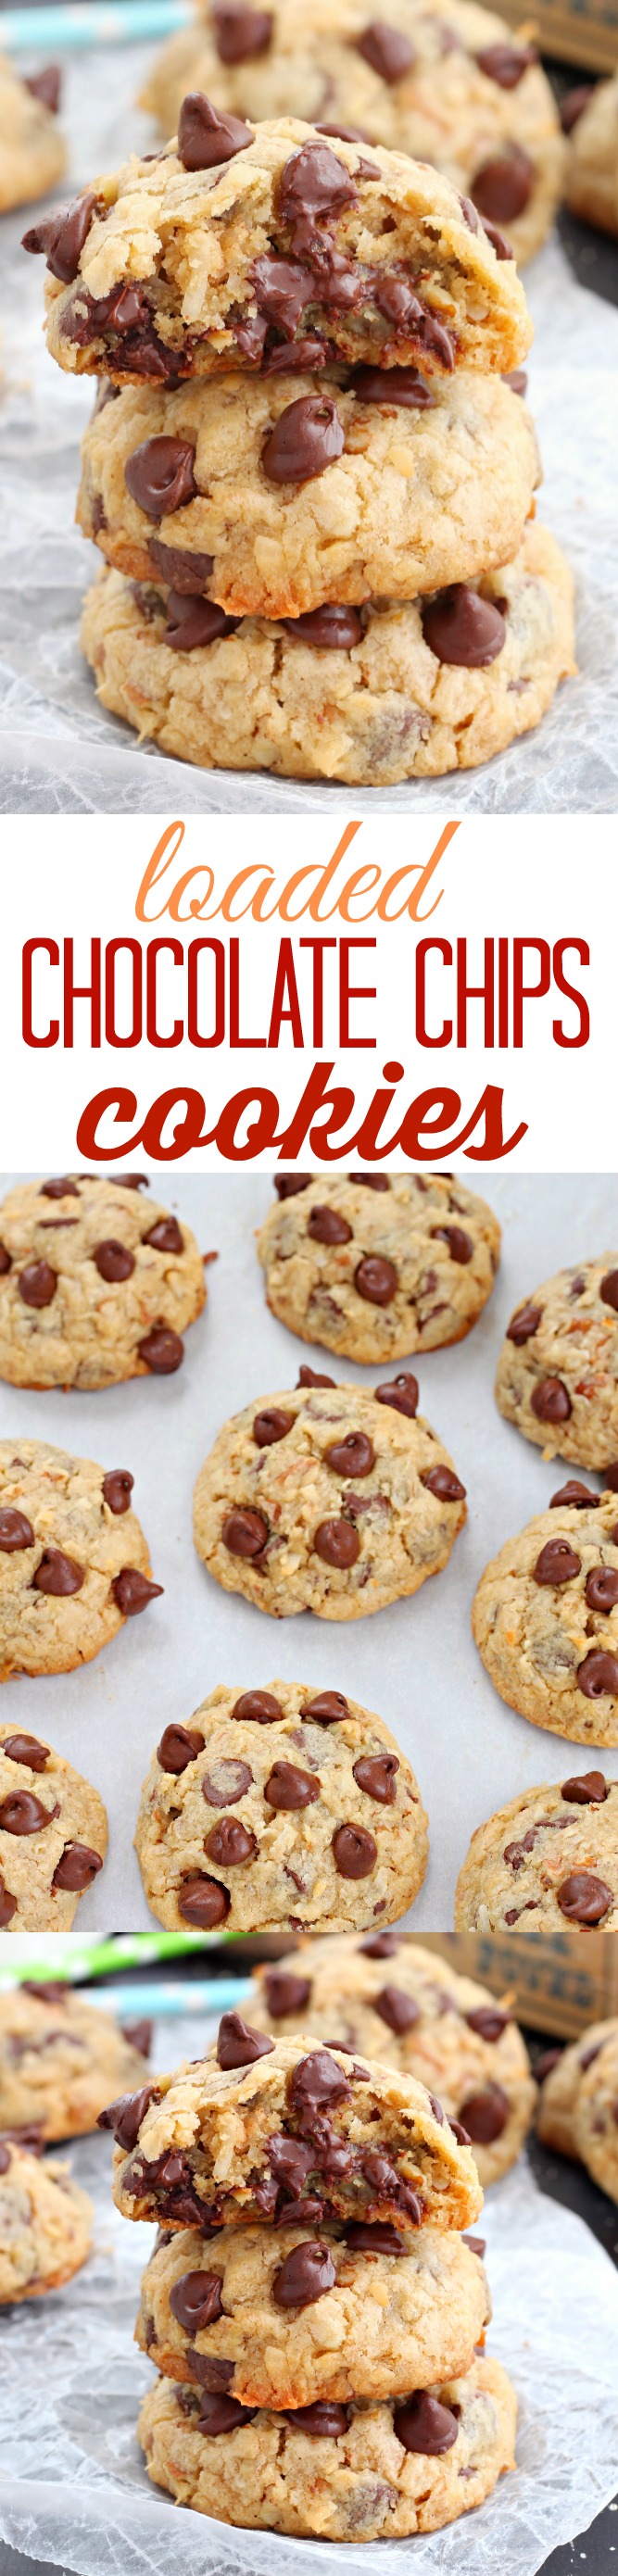 You won’t get enough of these soft and chewy loaded chocolate chip cookies packed with chopped pecans and coconut flakes! Totally irresistible!!!